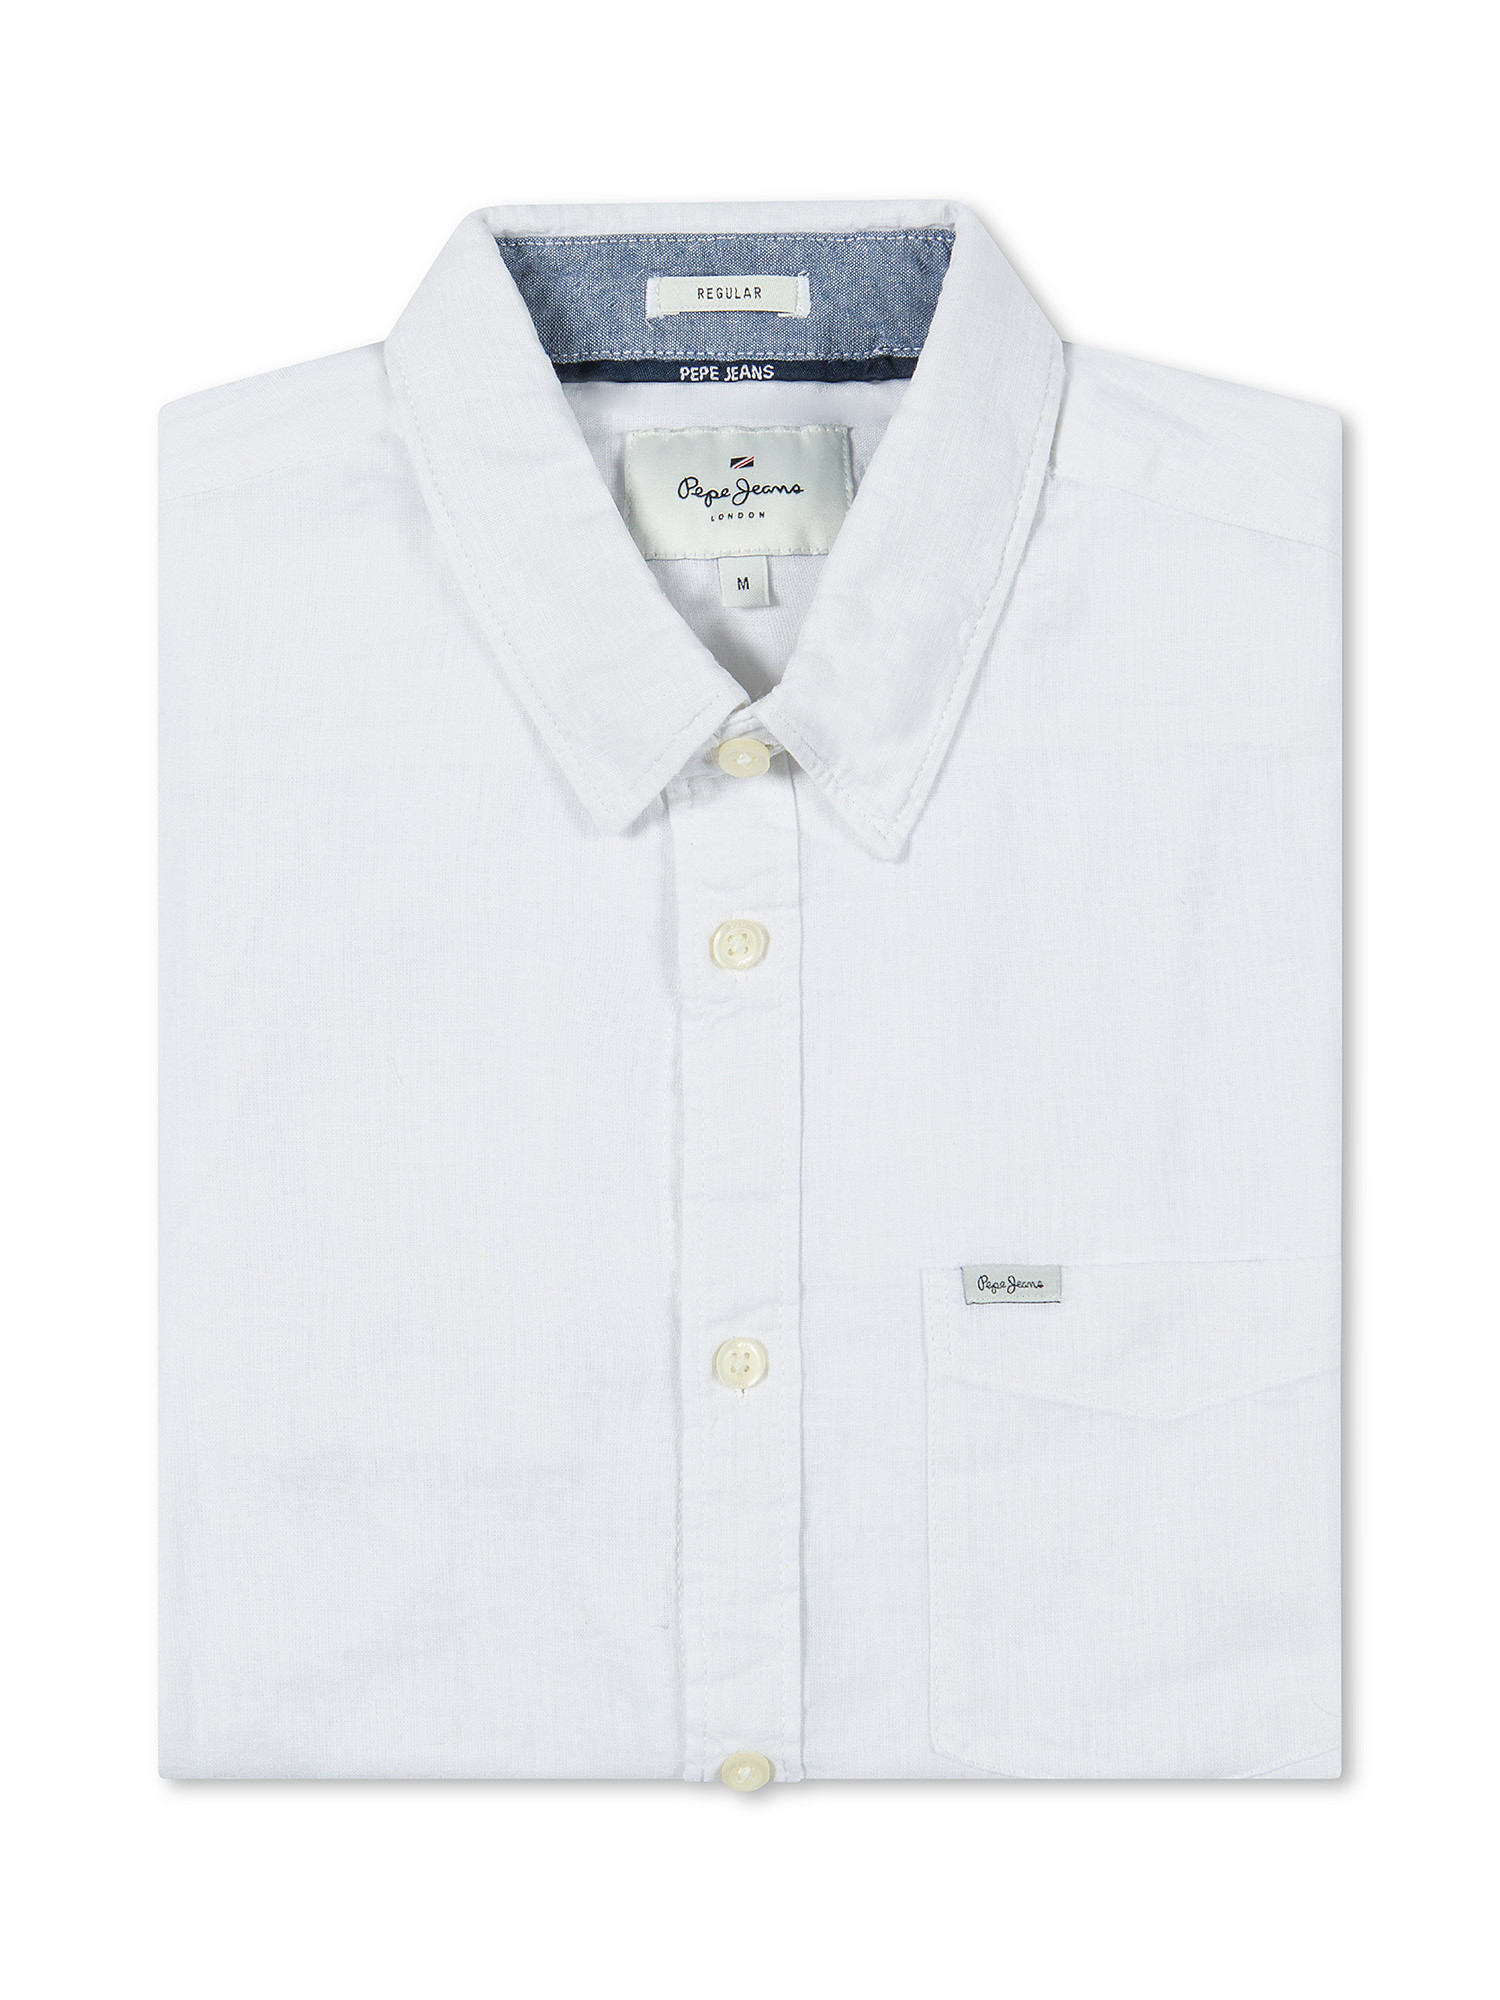 Pepe Jeans - Linen blend shirt, White, large image number 0